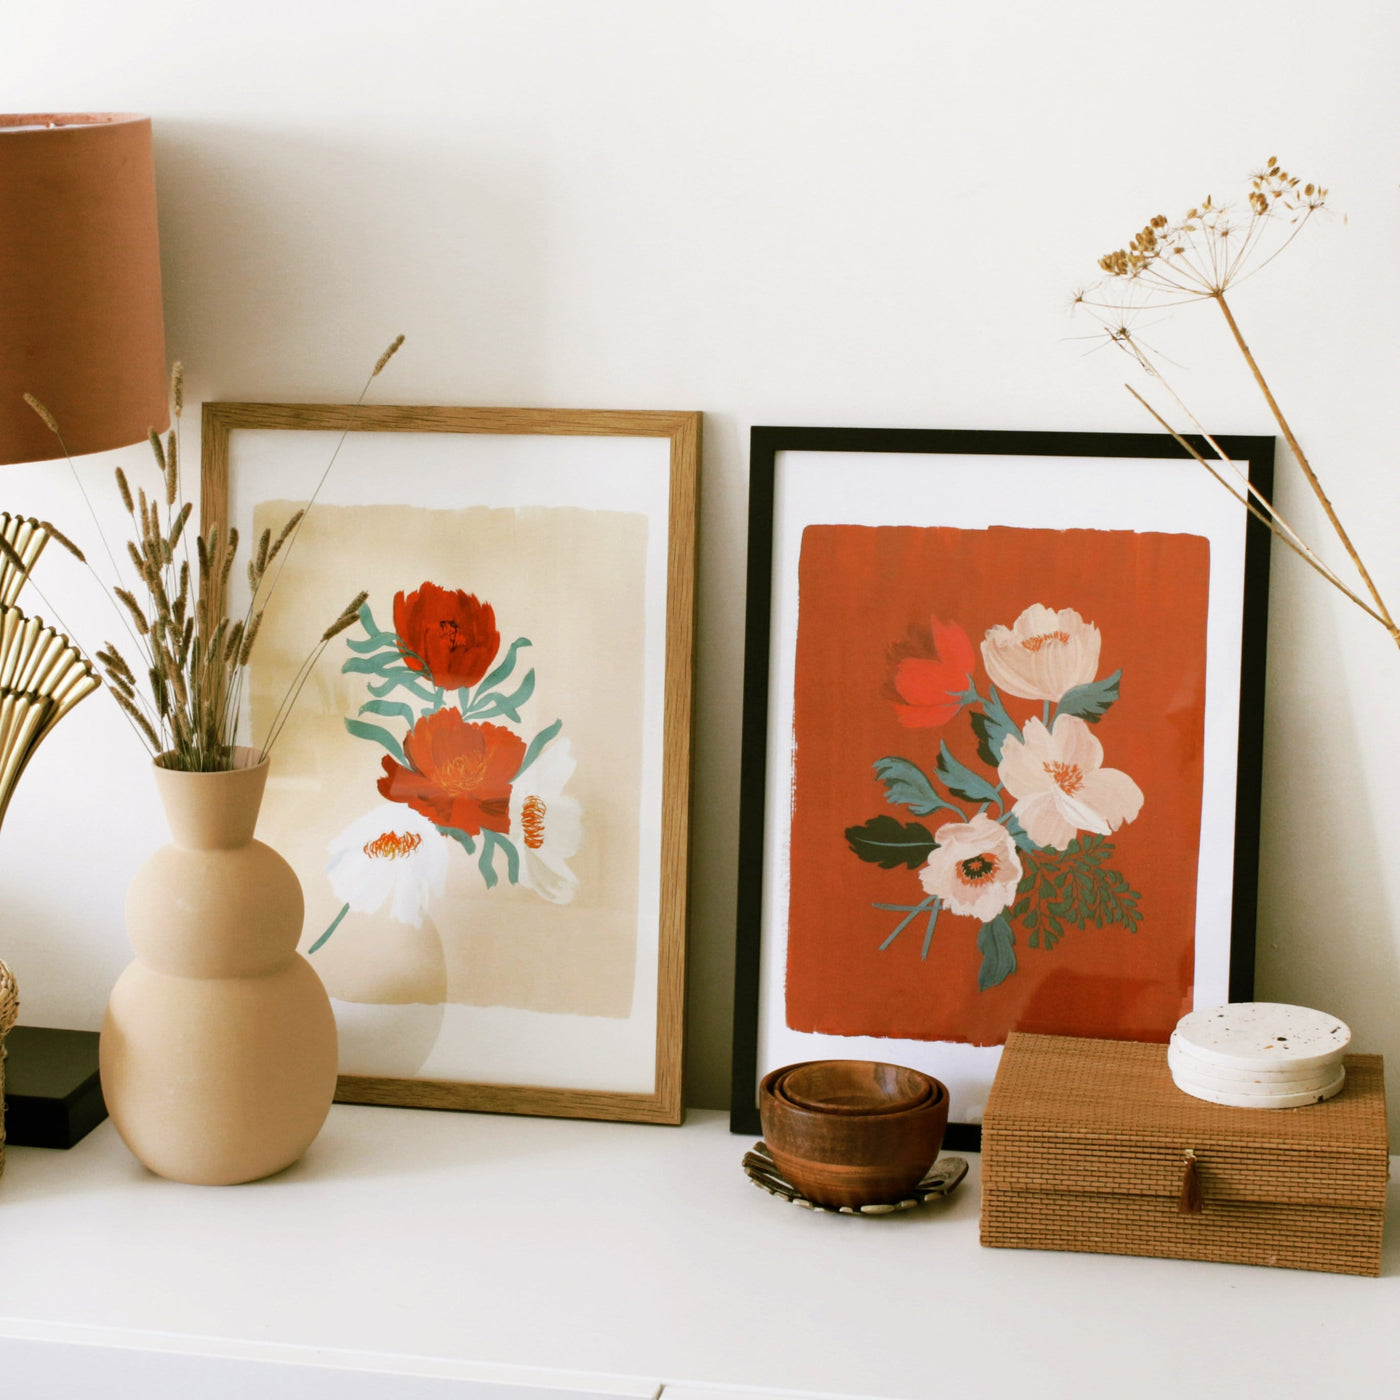 A3 Floral Print With Red and White Cosmos Flowers In An Oak Frame -  Annie Dornan-Smith